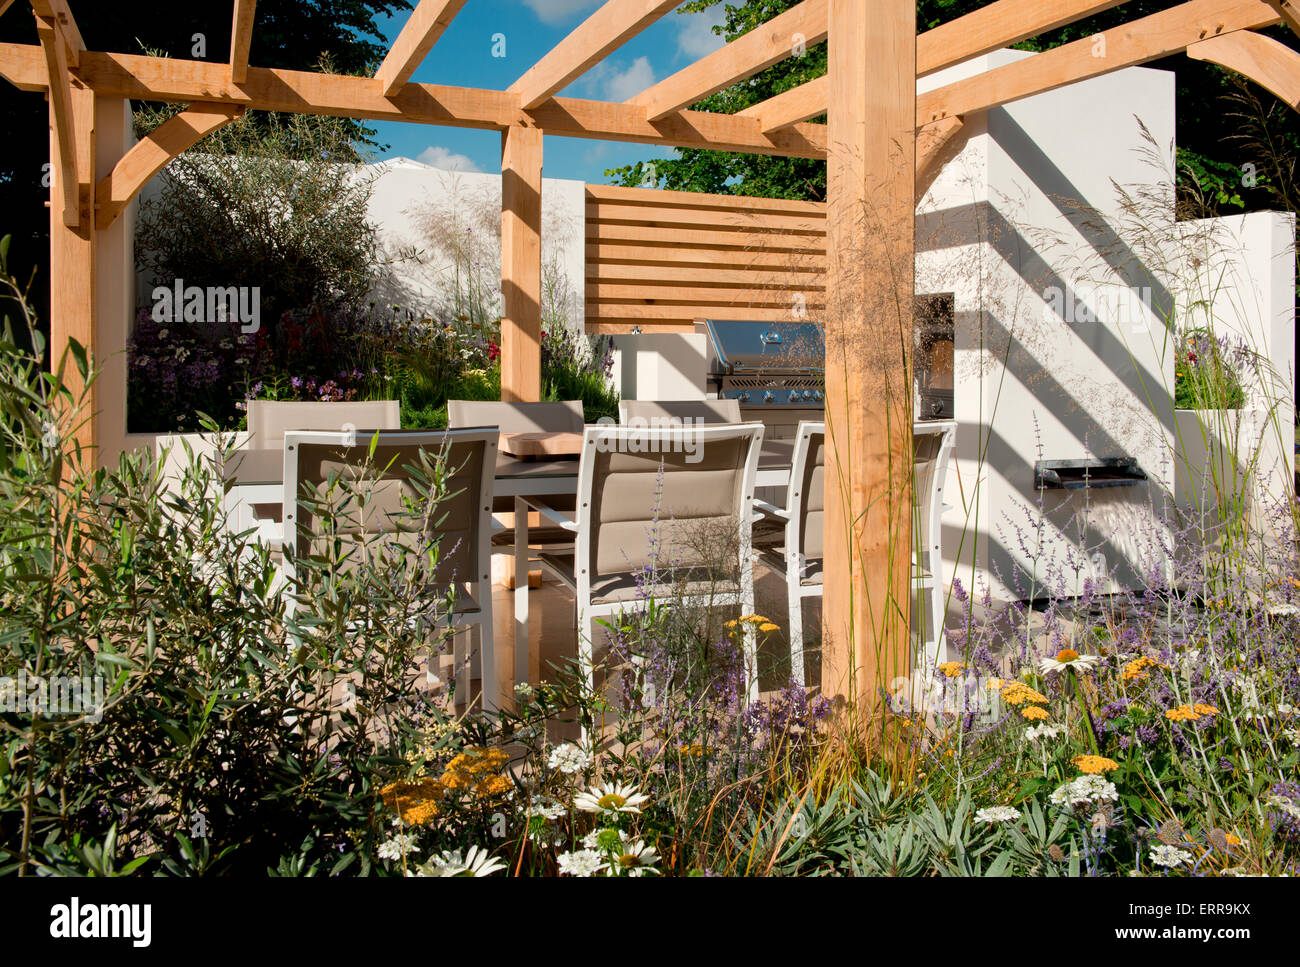 Seating and an outdoor kitchen under a pergola in The Al Fresco Garden at The Hampton Court Flower Show, 2014 Stock Photo